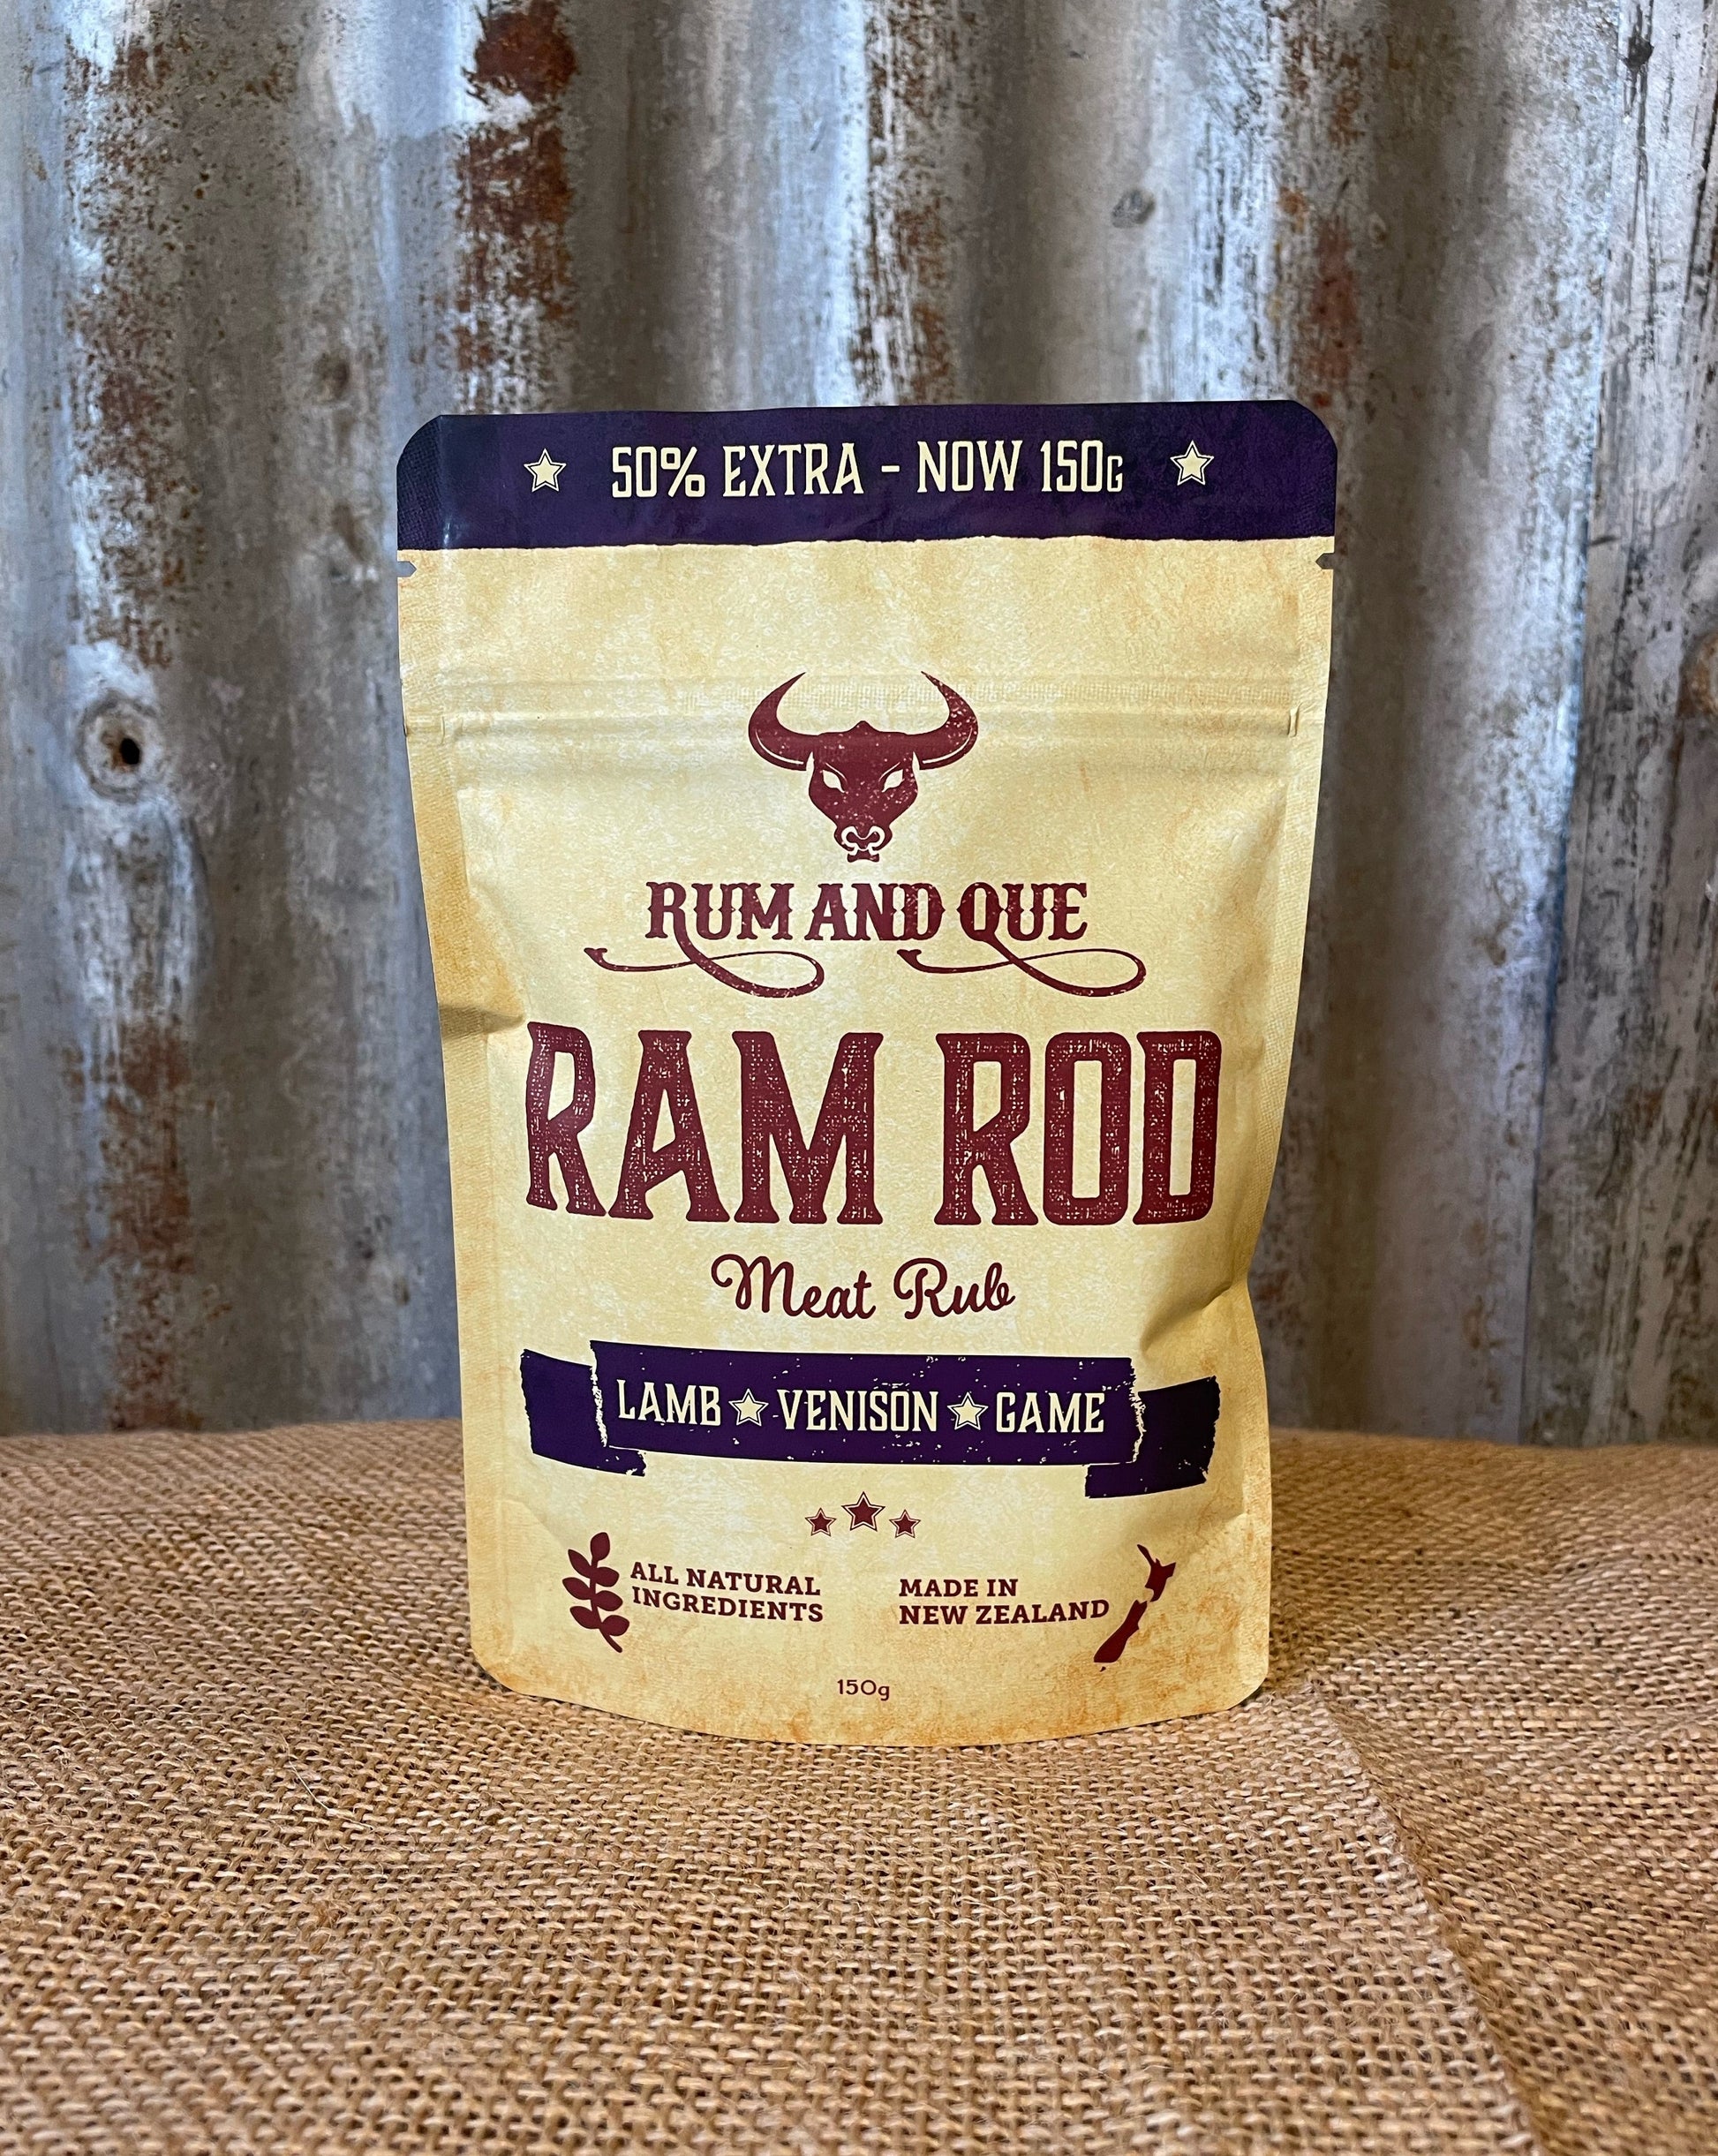 Rum and Que Ram Rod - Pouch 150g